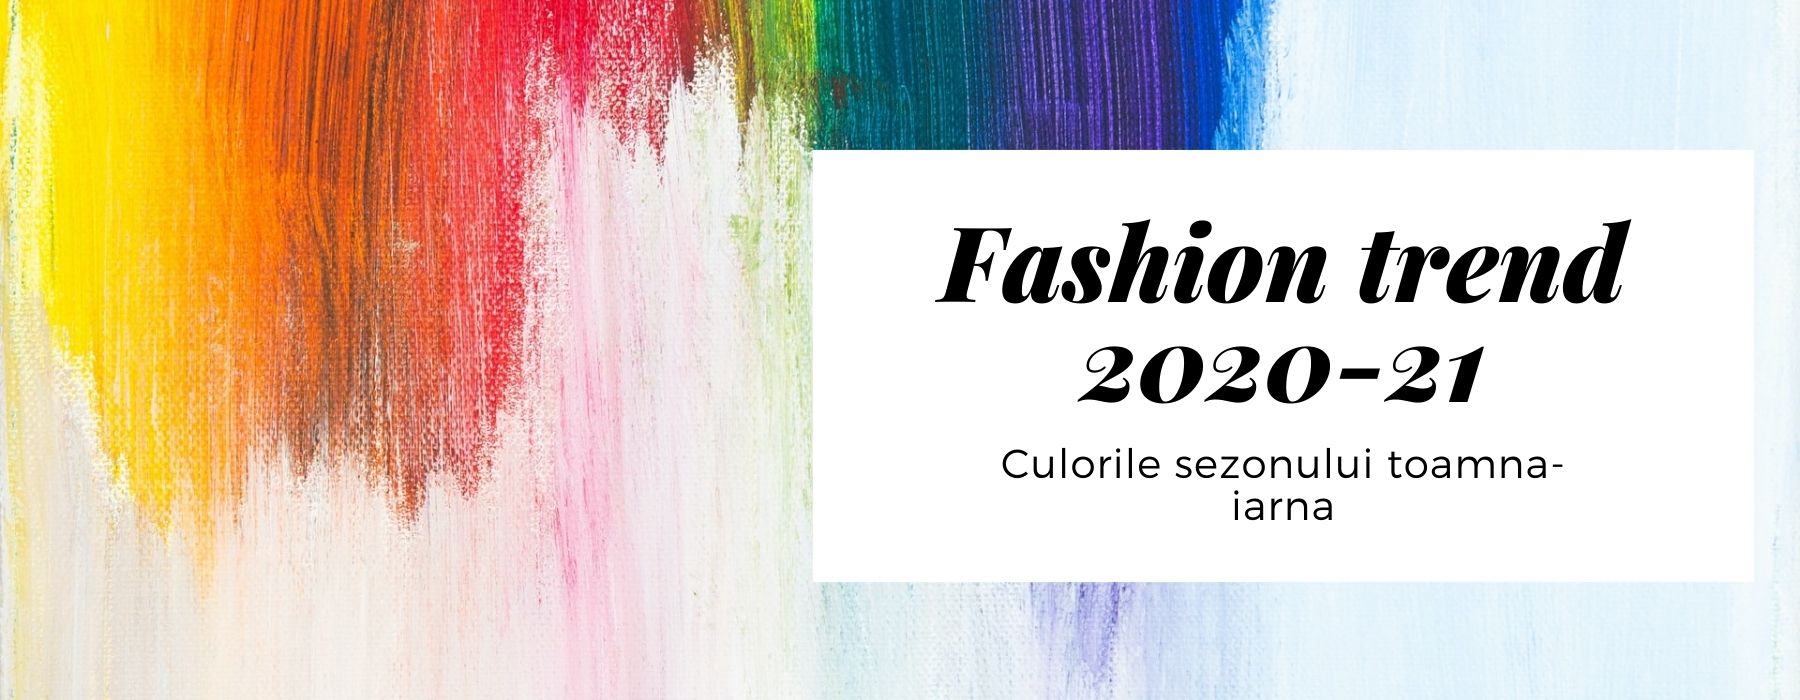 You are currently viewing Fashion trend 2020-2021. Culorile sezonului toamna-iarna